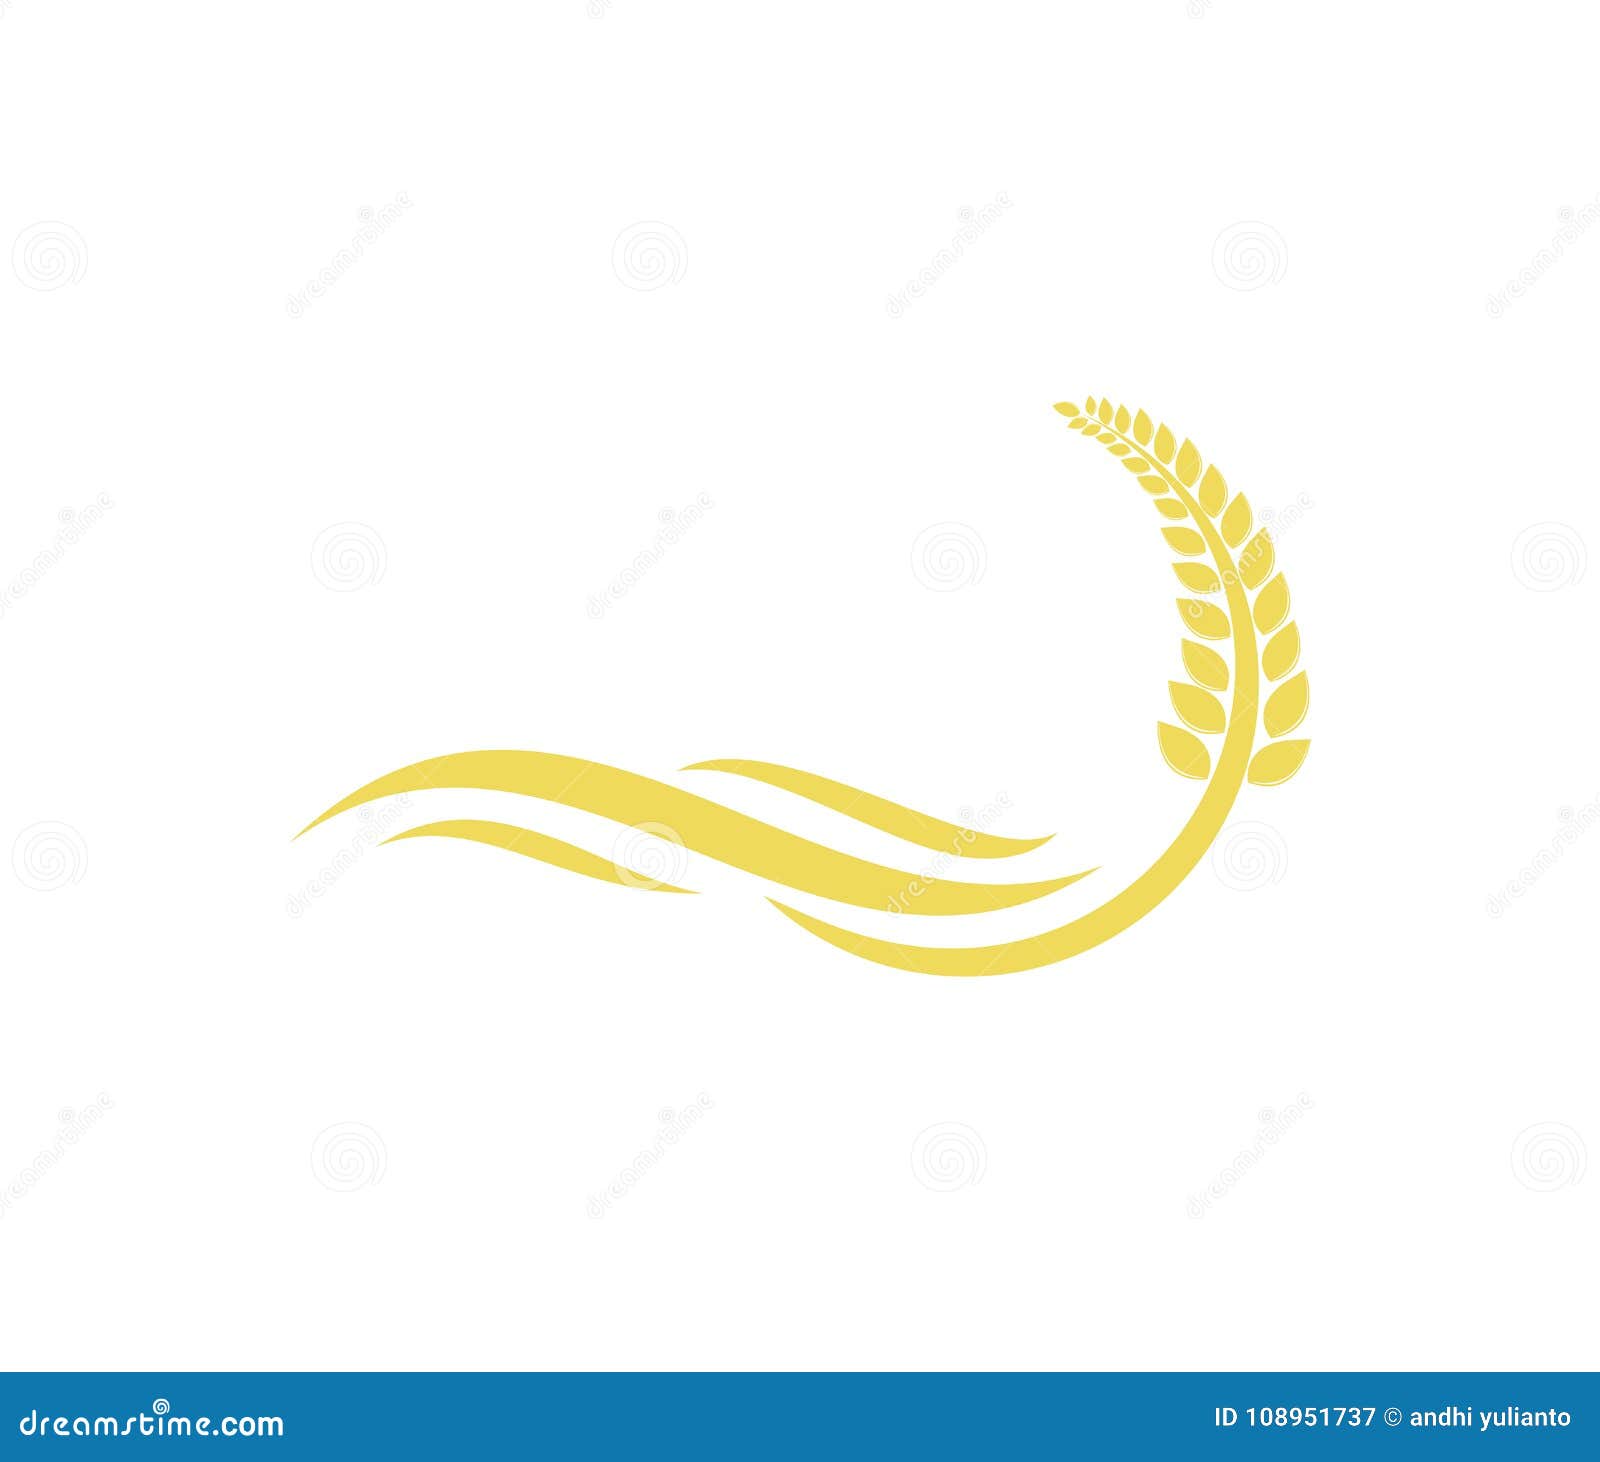  logo  for agriculture, agronomy, wheat farm, rural country farming field, natural harvest